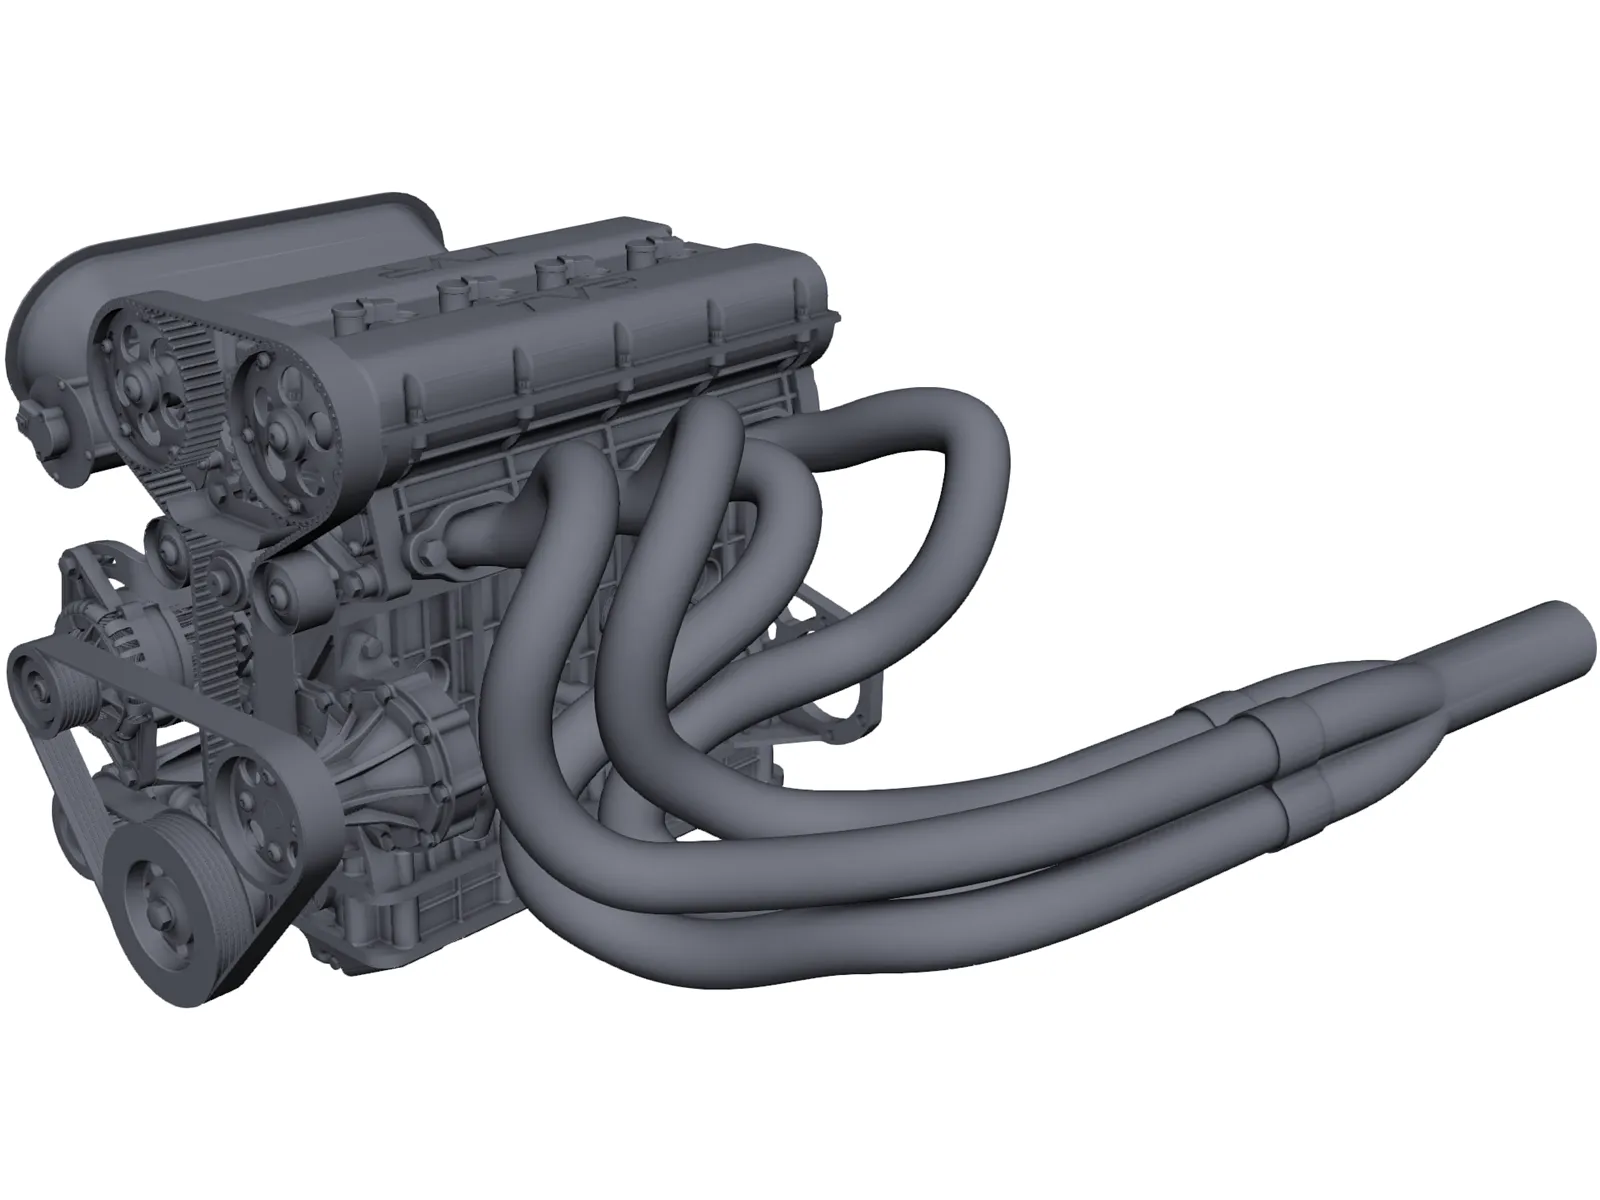 IC Engine 2D, 3D CAD Model Library